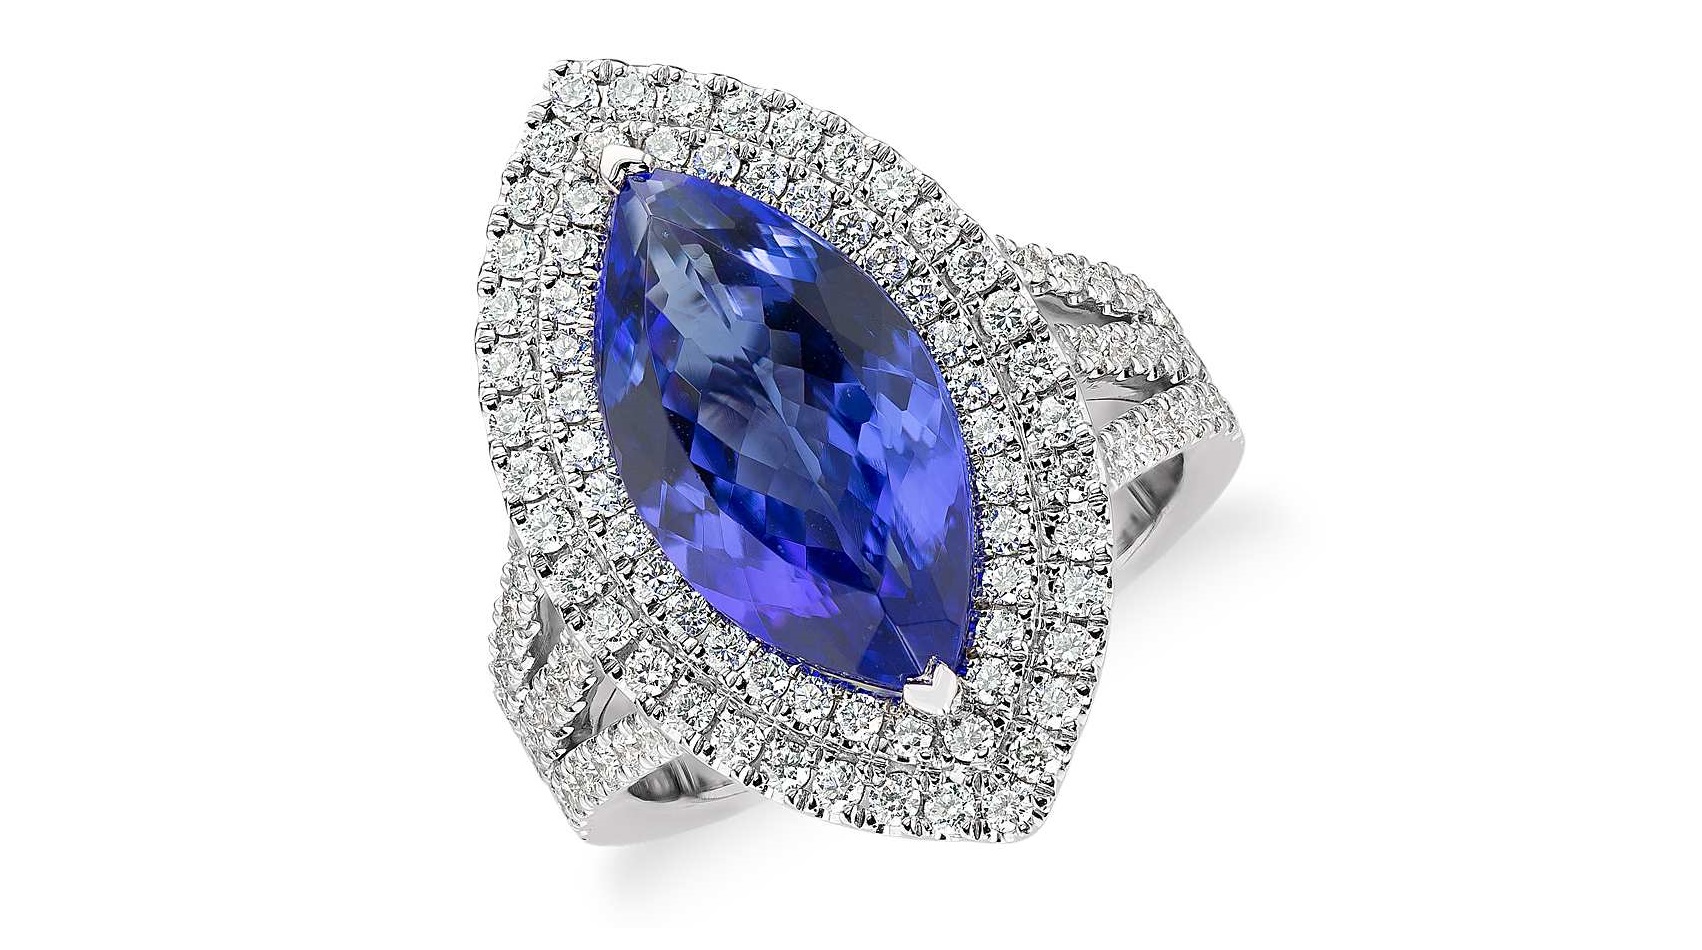 Tanzanite and Diamond Marquise Halo Cocktail Ring in 18k White Gold (5.31 ct. center)